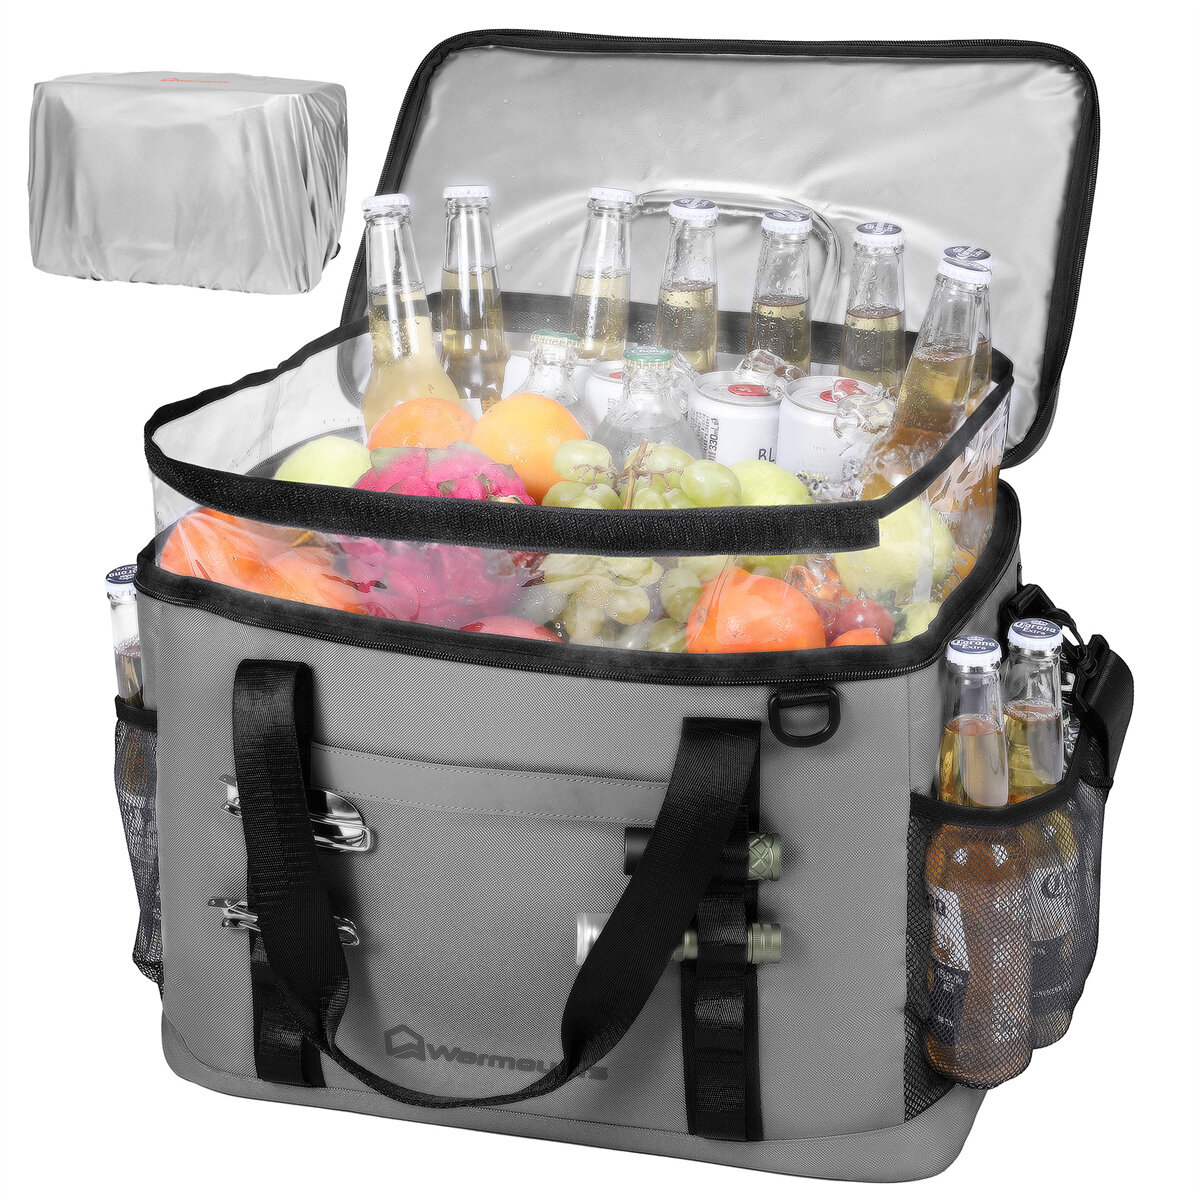 WARMOUNTS Backpack Cooler Insulated 75 Cans w/ Insulating Cover, Upgraded Leakproof Soft Cooler Backpack 2 Compartment f